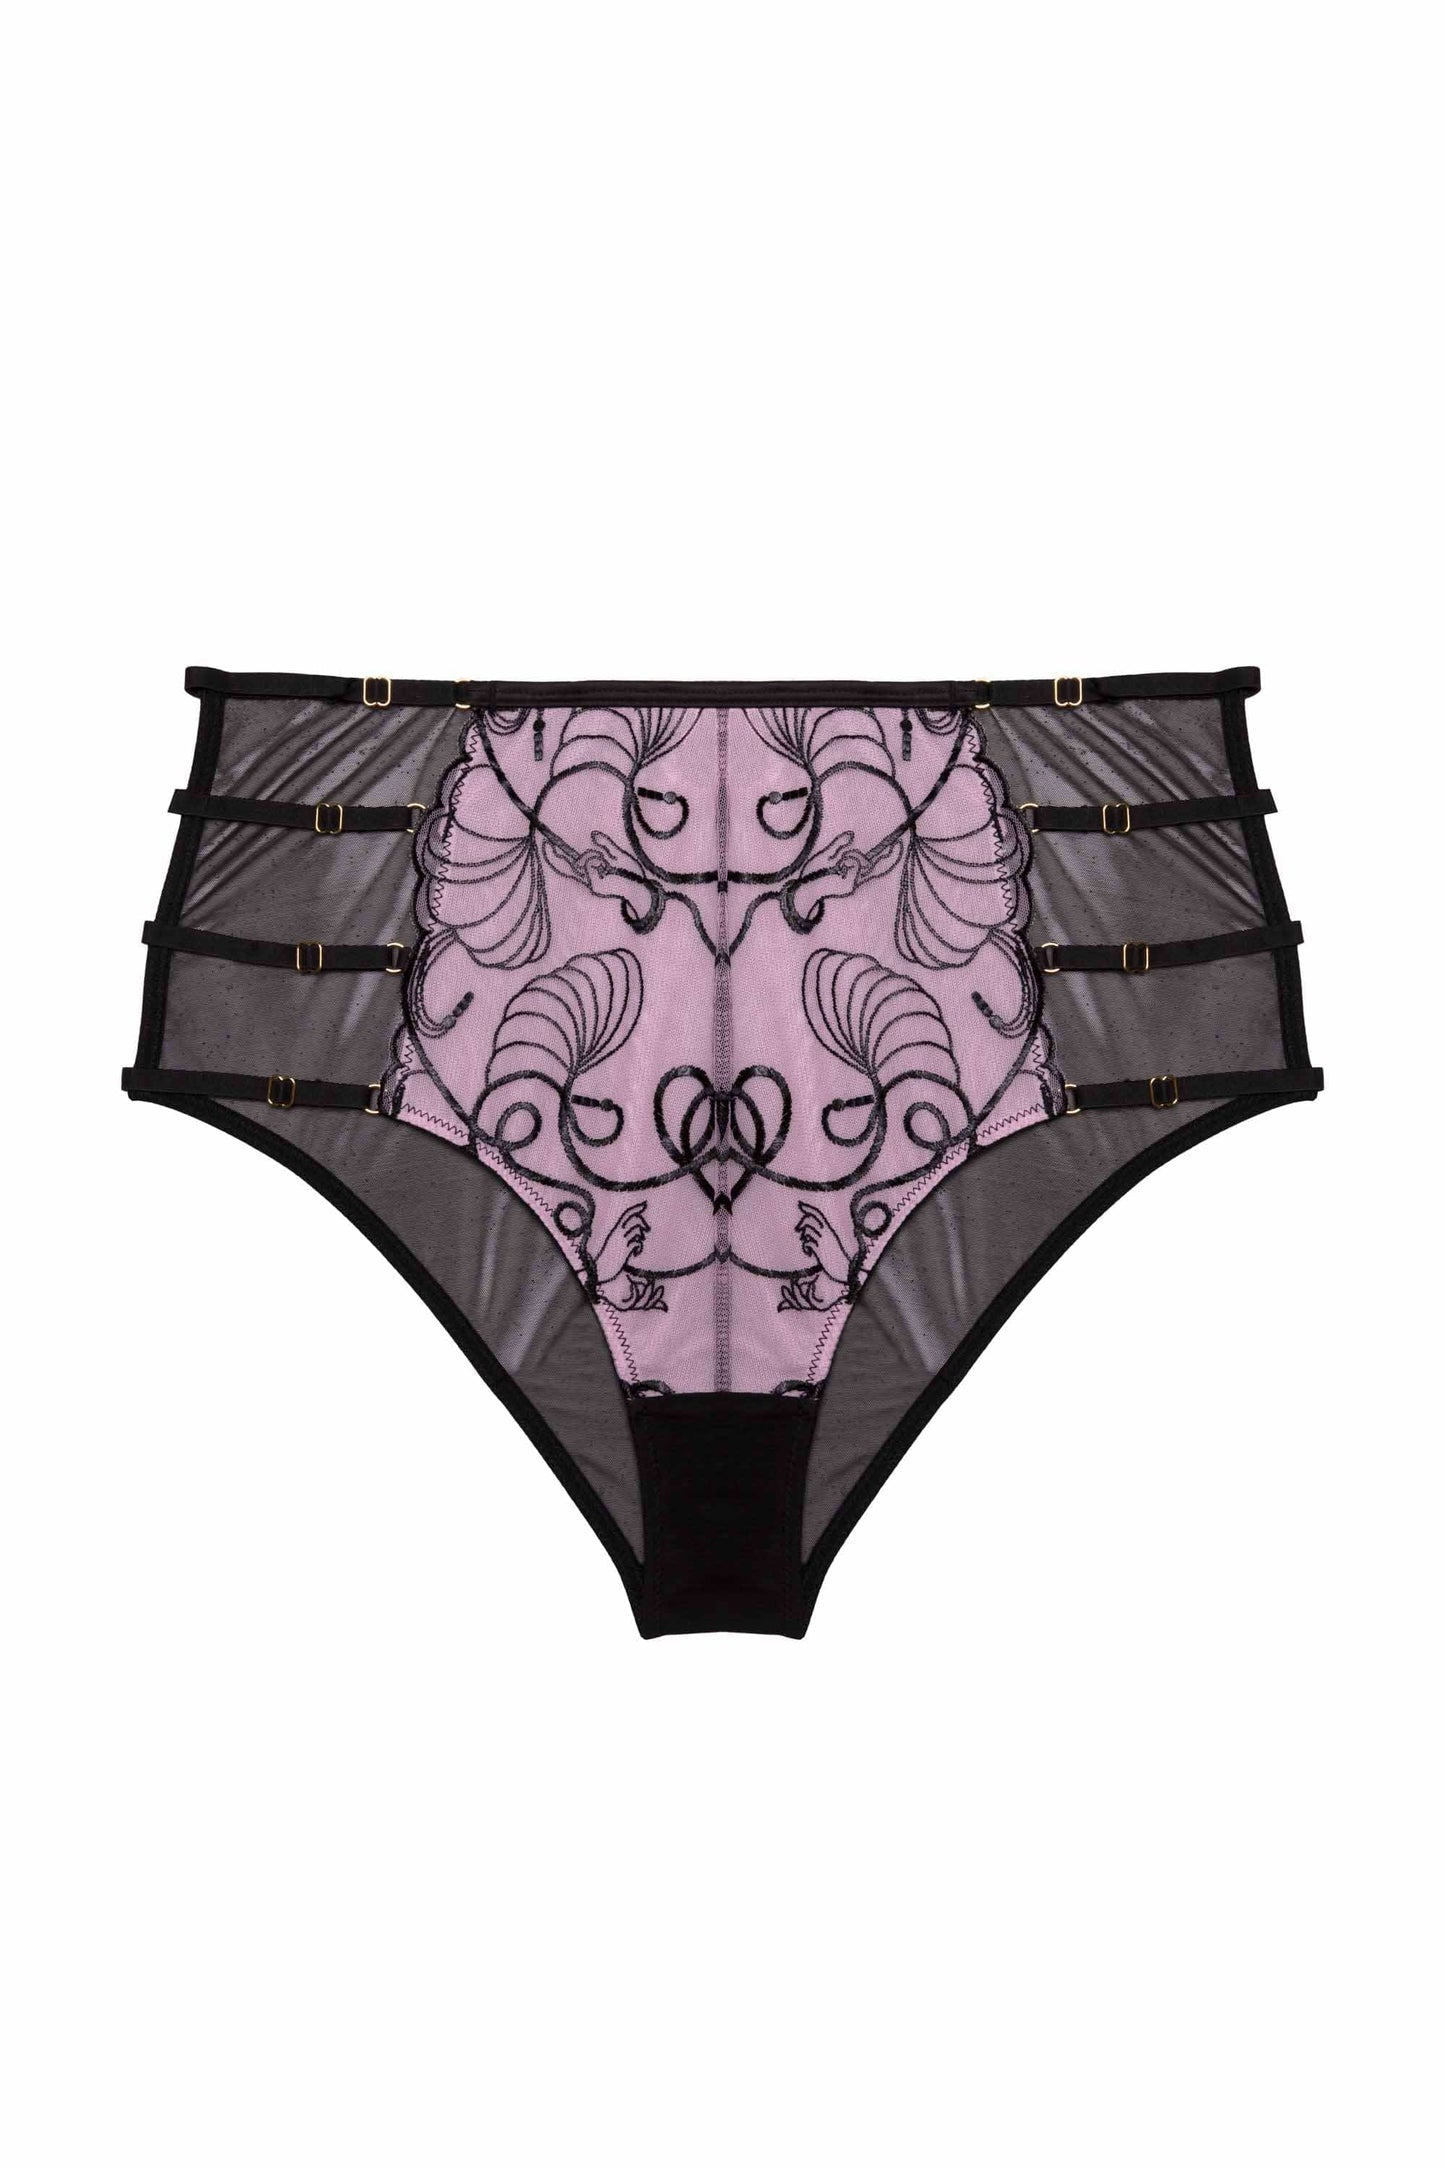 Jessie Pink & Black Whip Embroidery High Waist Brief By Playful Promises - sizes 4-22